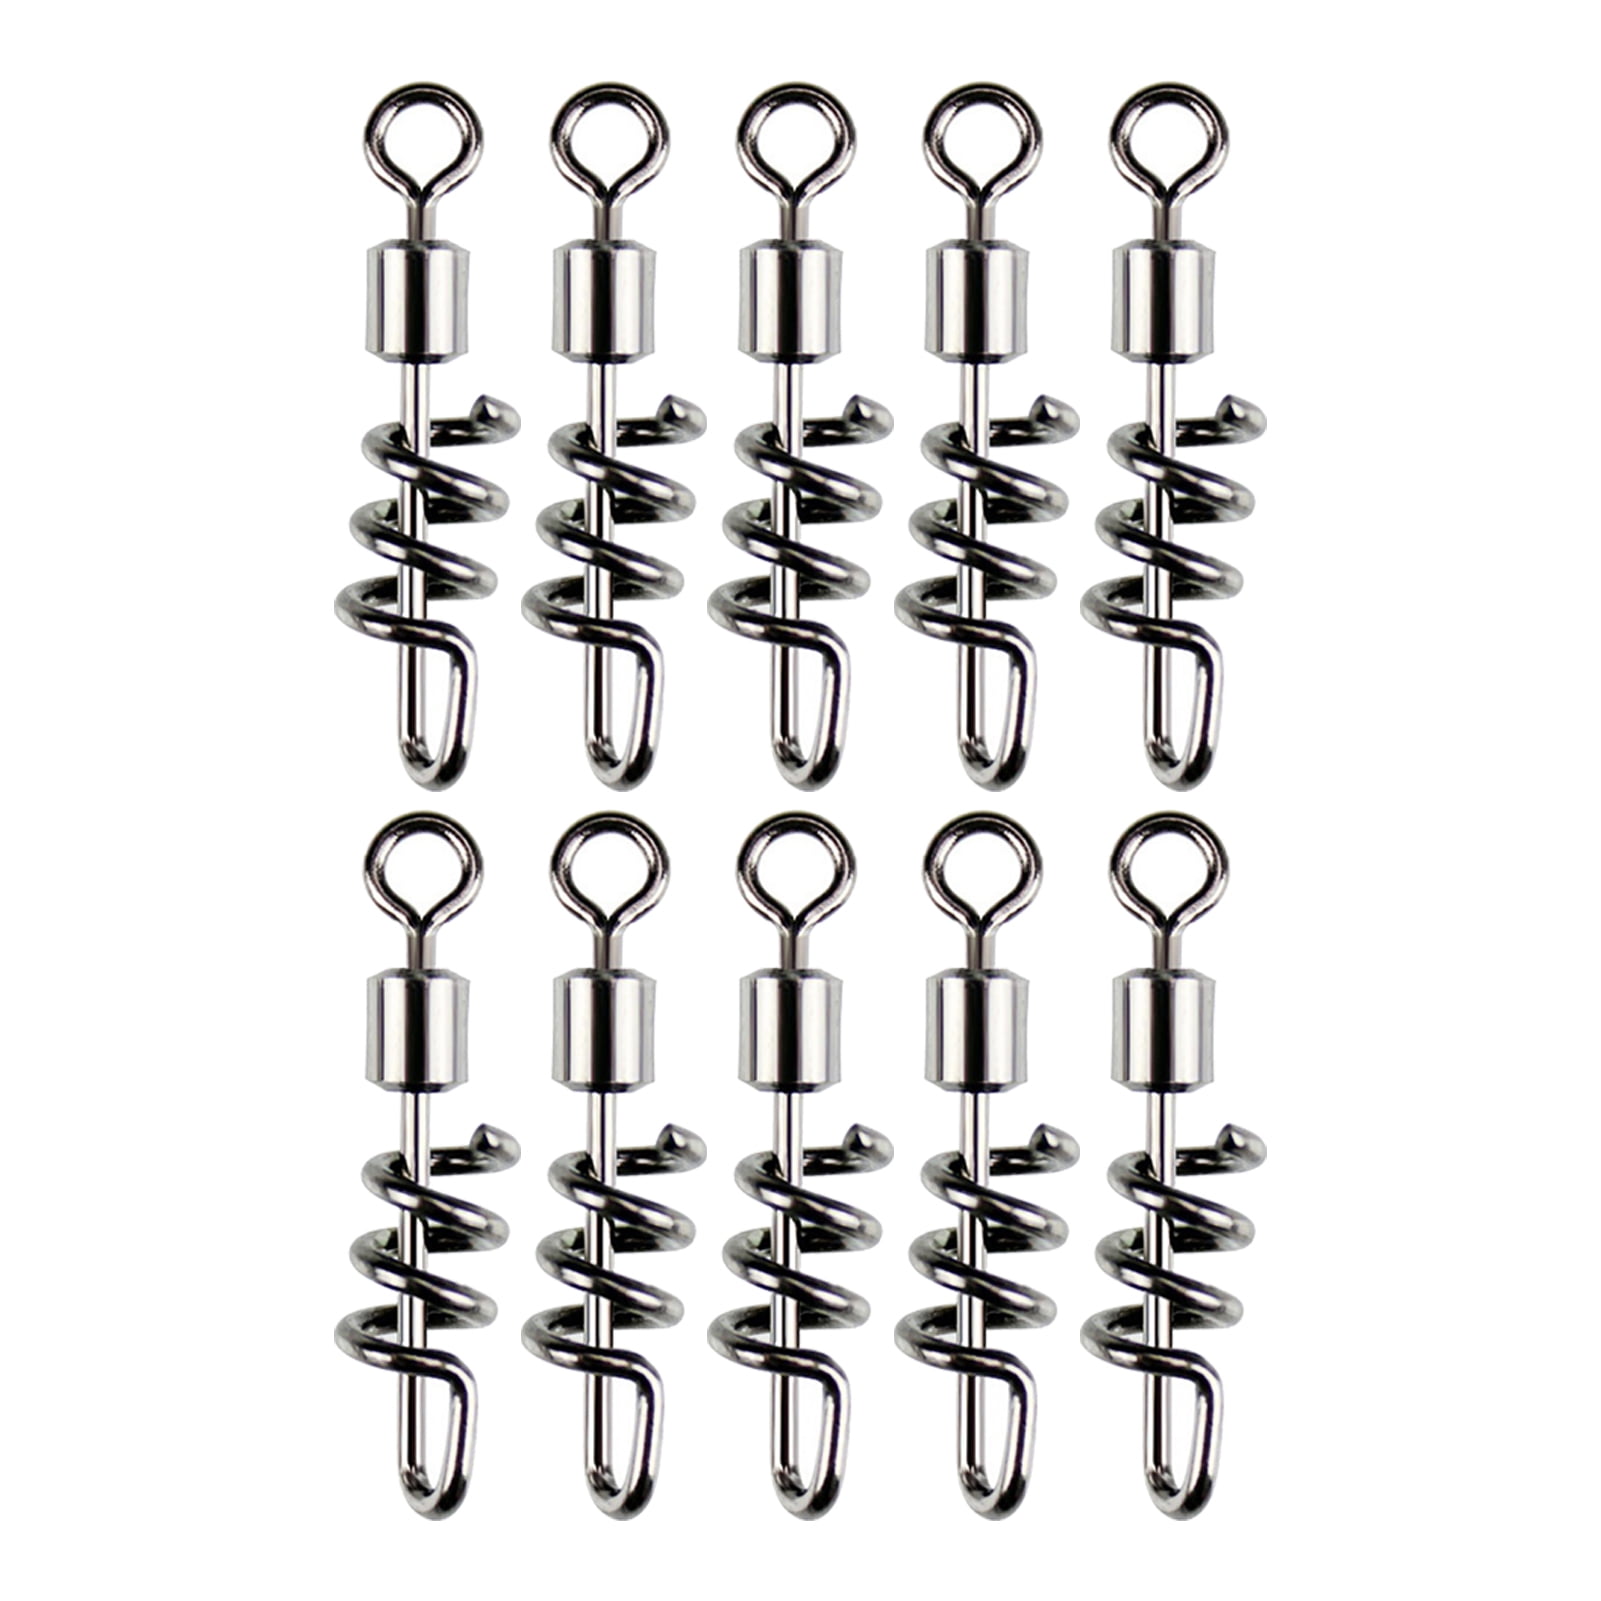 20pcs Fishing Screw Rolling Swivel Swirl Fishing Connector Tackle Accessories 